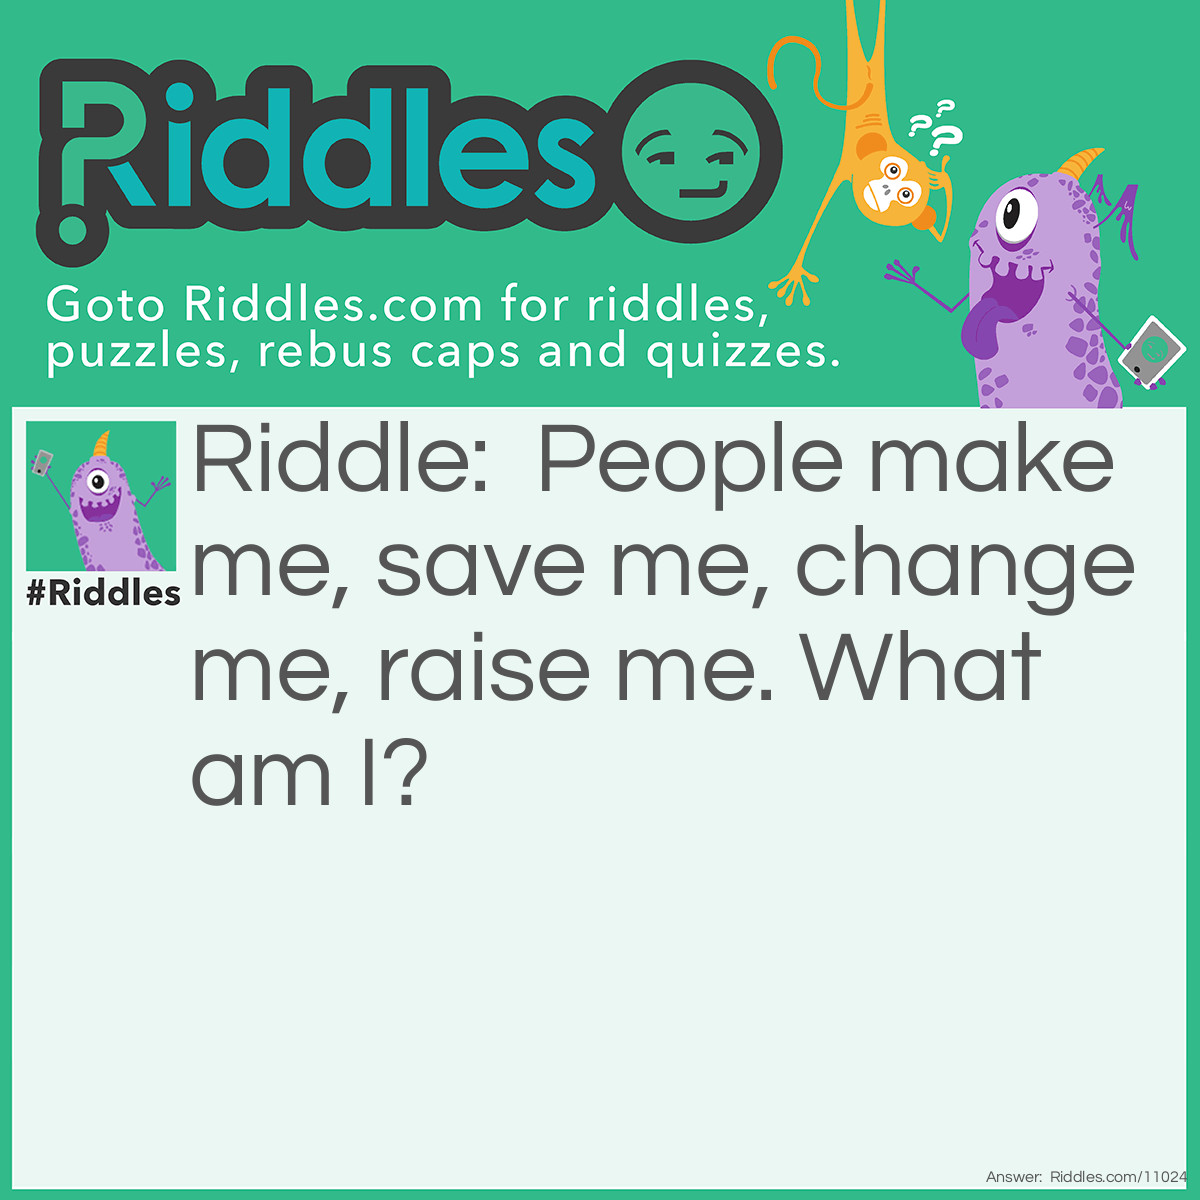 Riddle: People make me, save me, change me, raise me. What am I? Answer: Money!